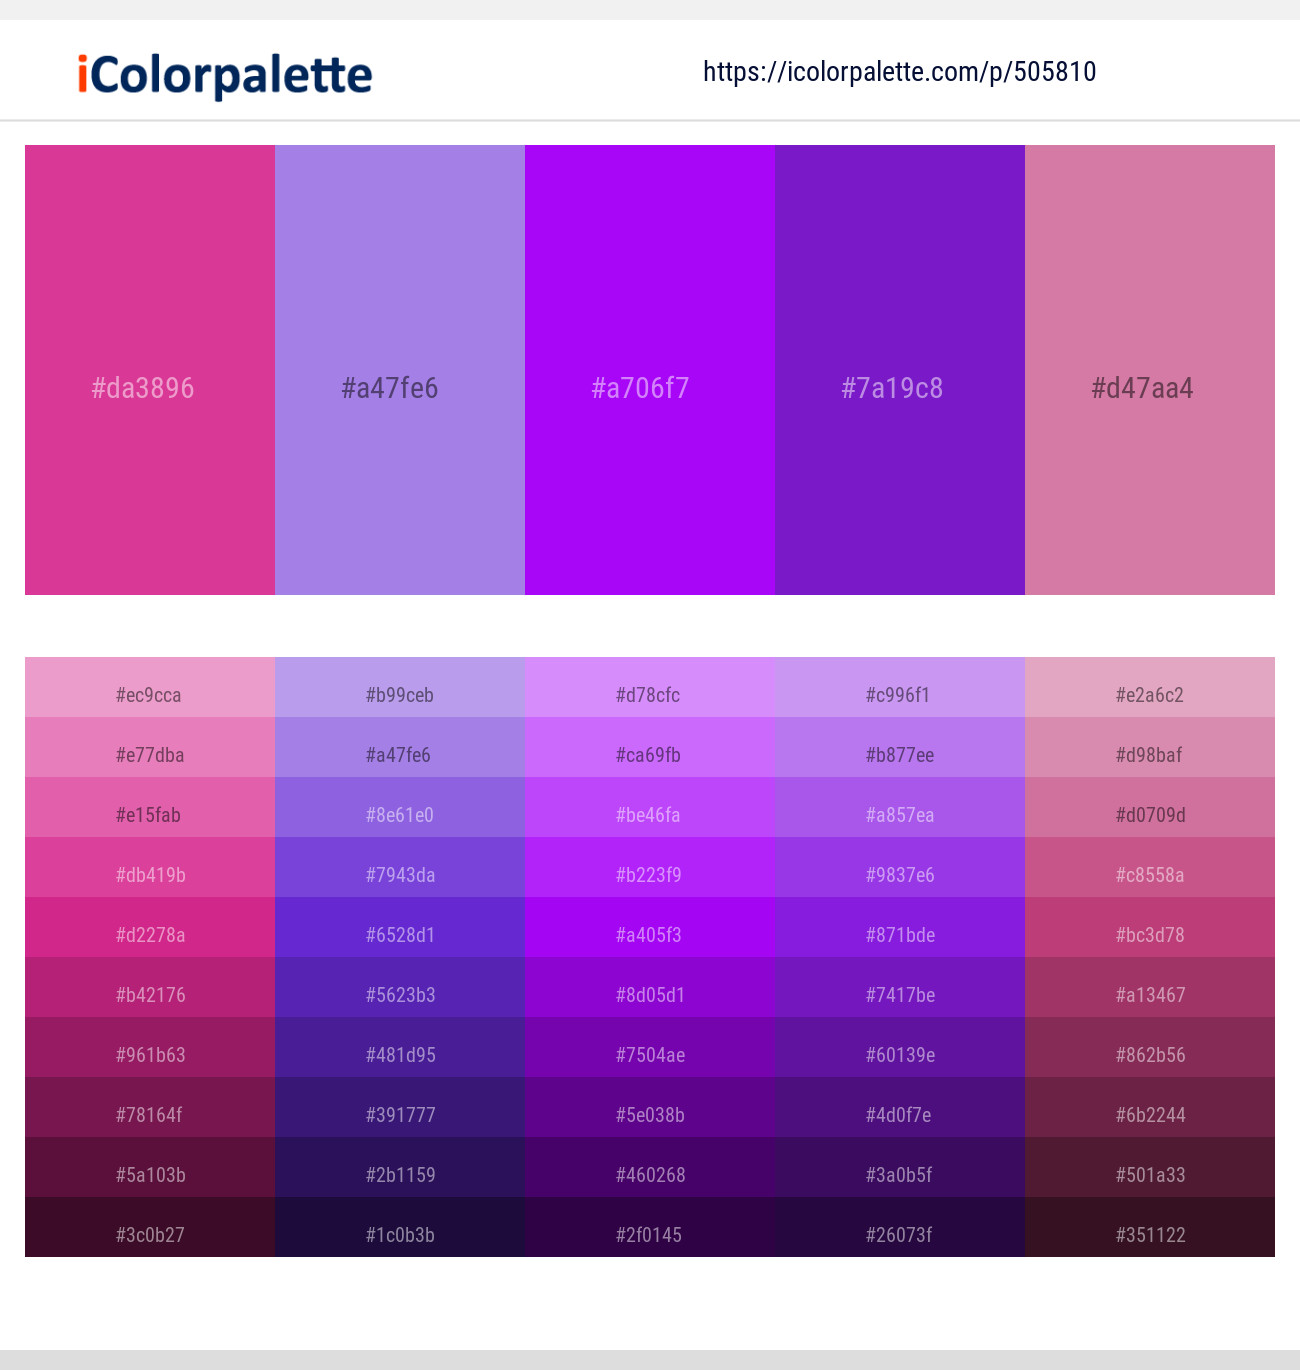 Mix of blue and red make purple color - ColorsWall